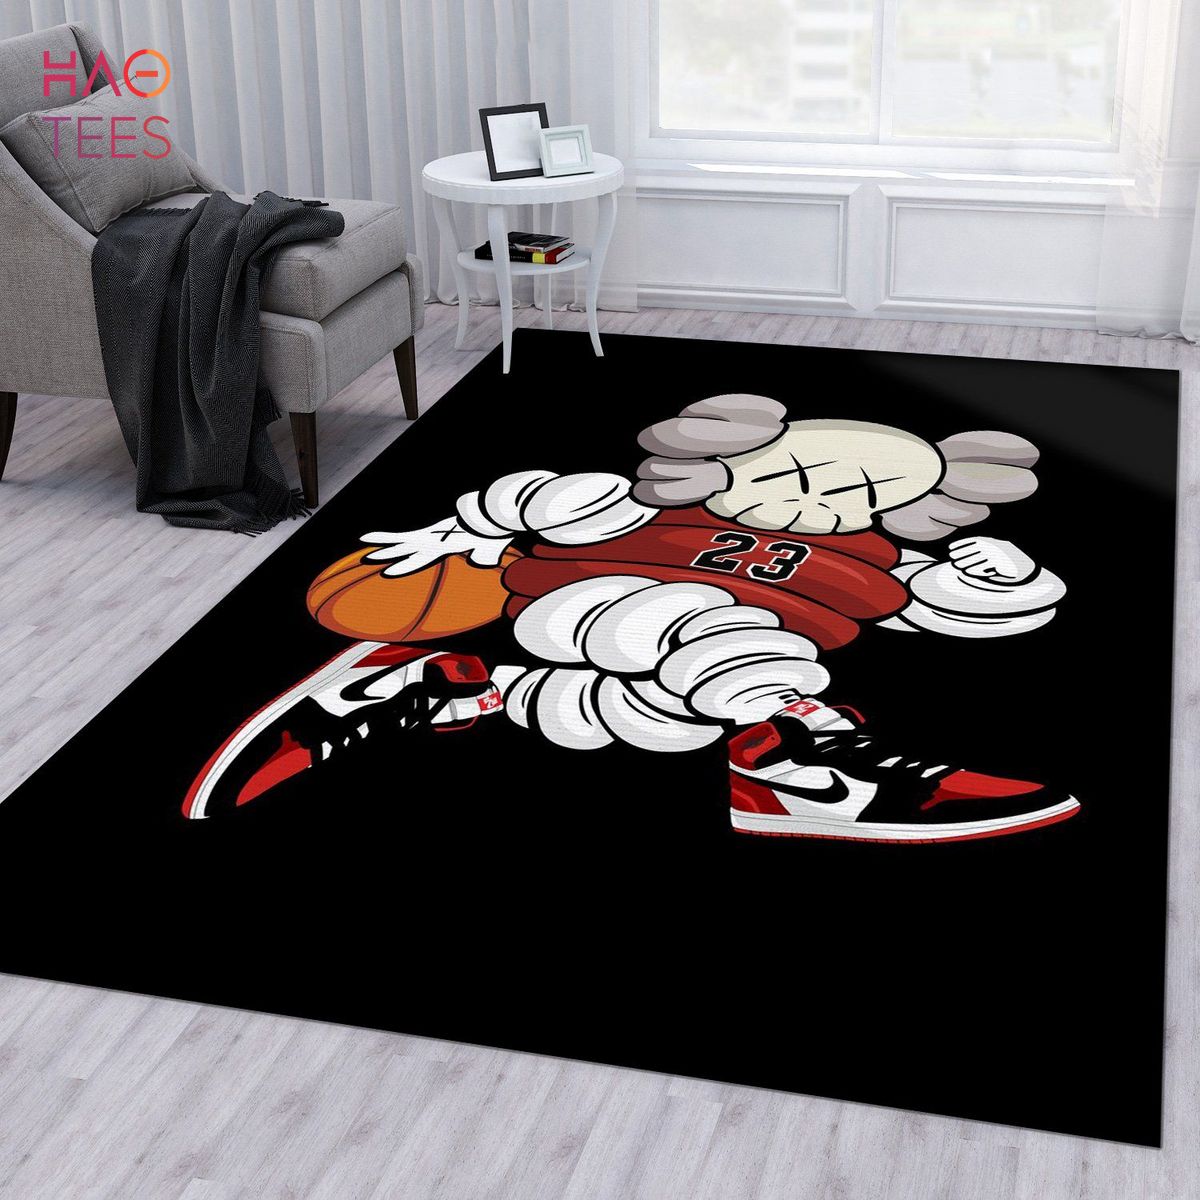 BEST Just Skate It Sneakers Area Rug For Christmas Bedroom Rug Family Gift  US Decor